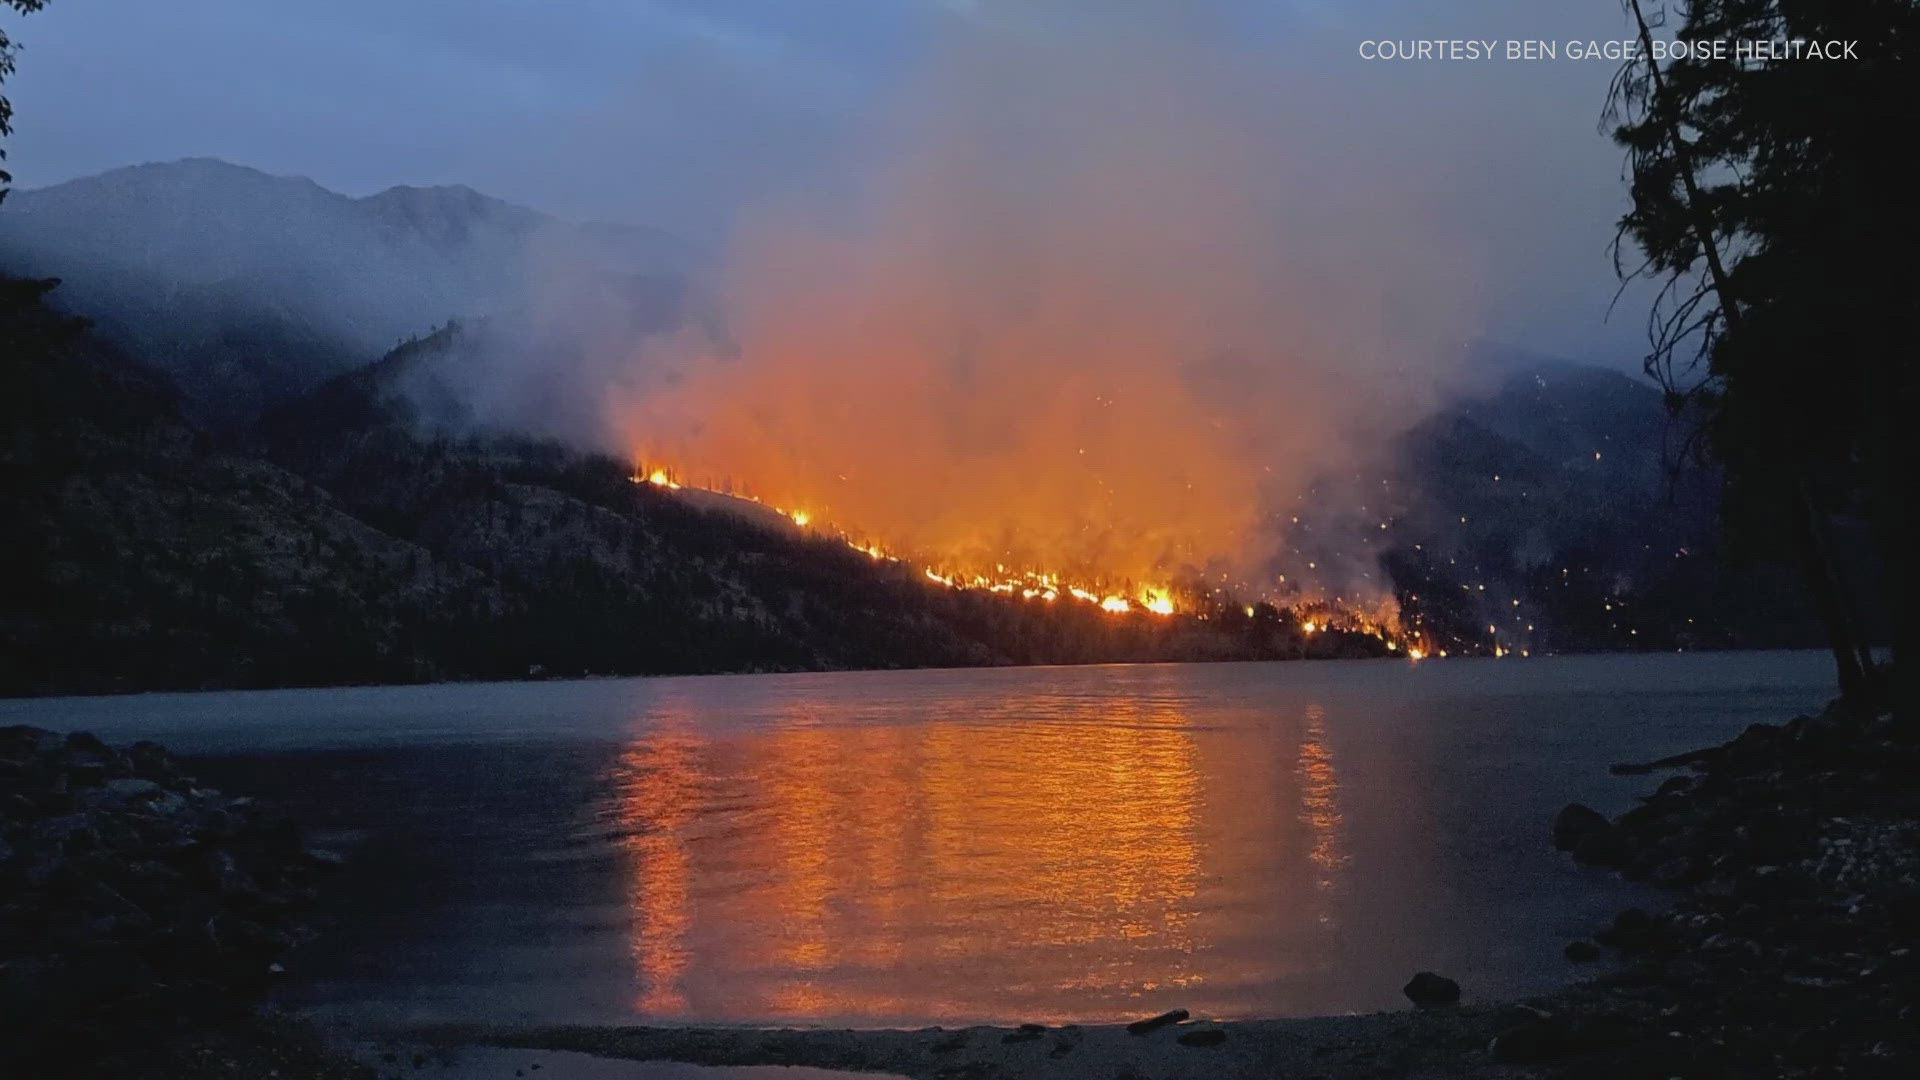 The Pioneer fire, burning near Lake Chelan since June 8th, has doubled in size to about 4,000 acres